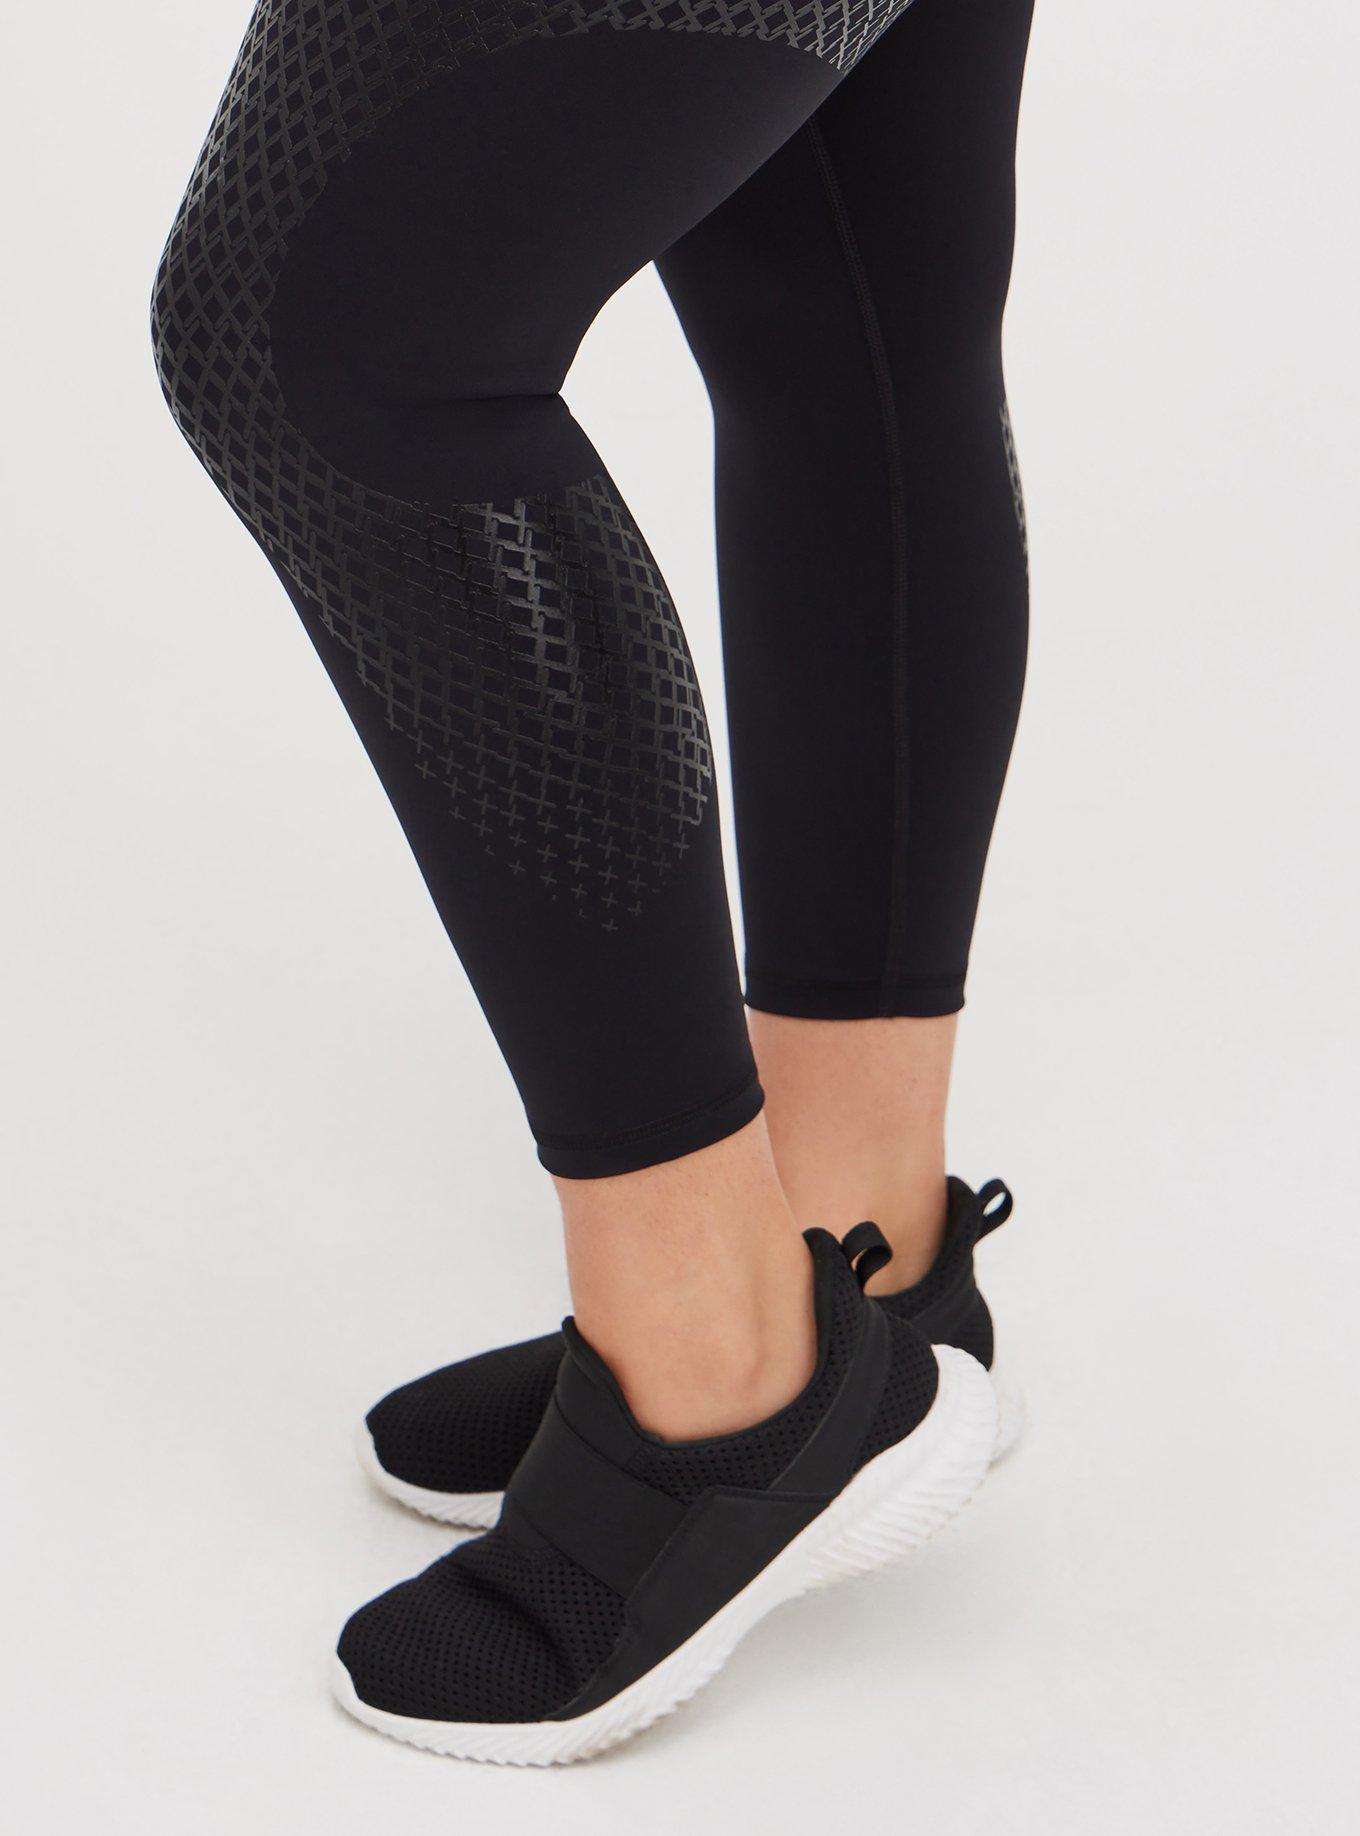 Buy Nike Black Dri-FIT One High-Waisted 7/8 Novelty Leggings from Next  Luxembourg